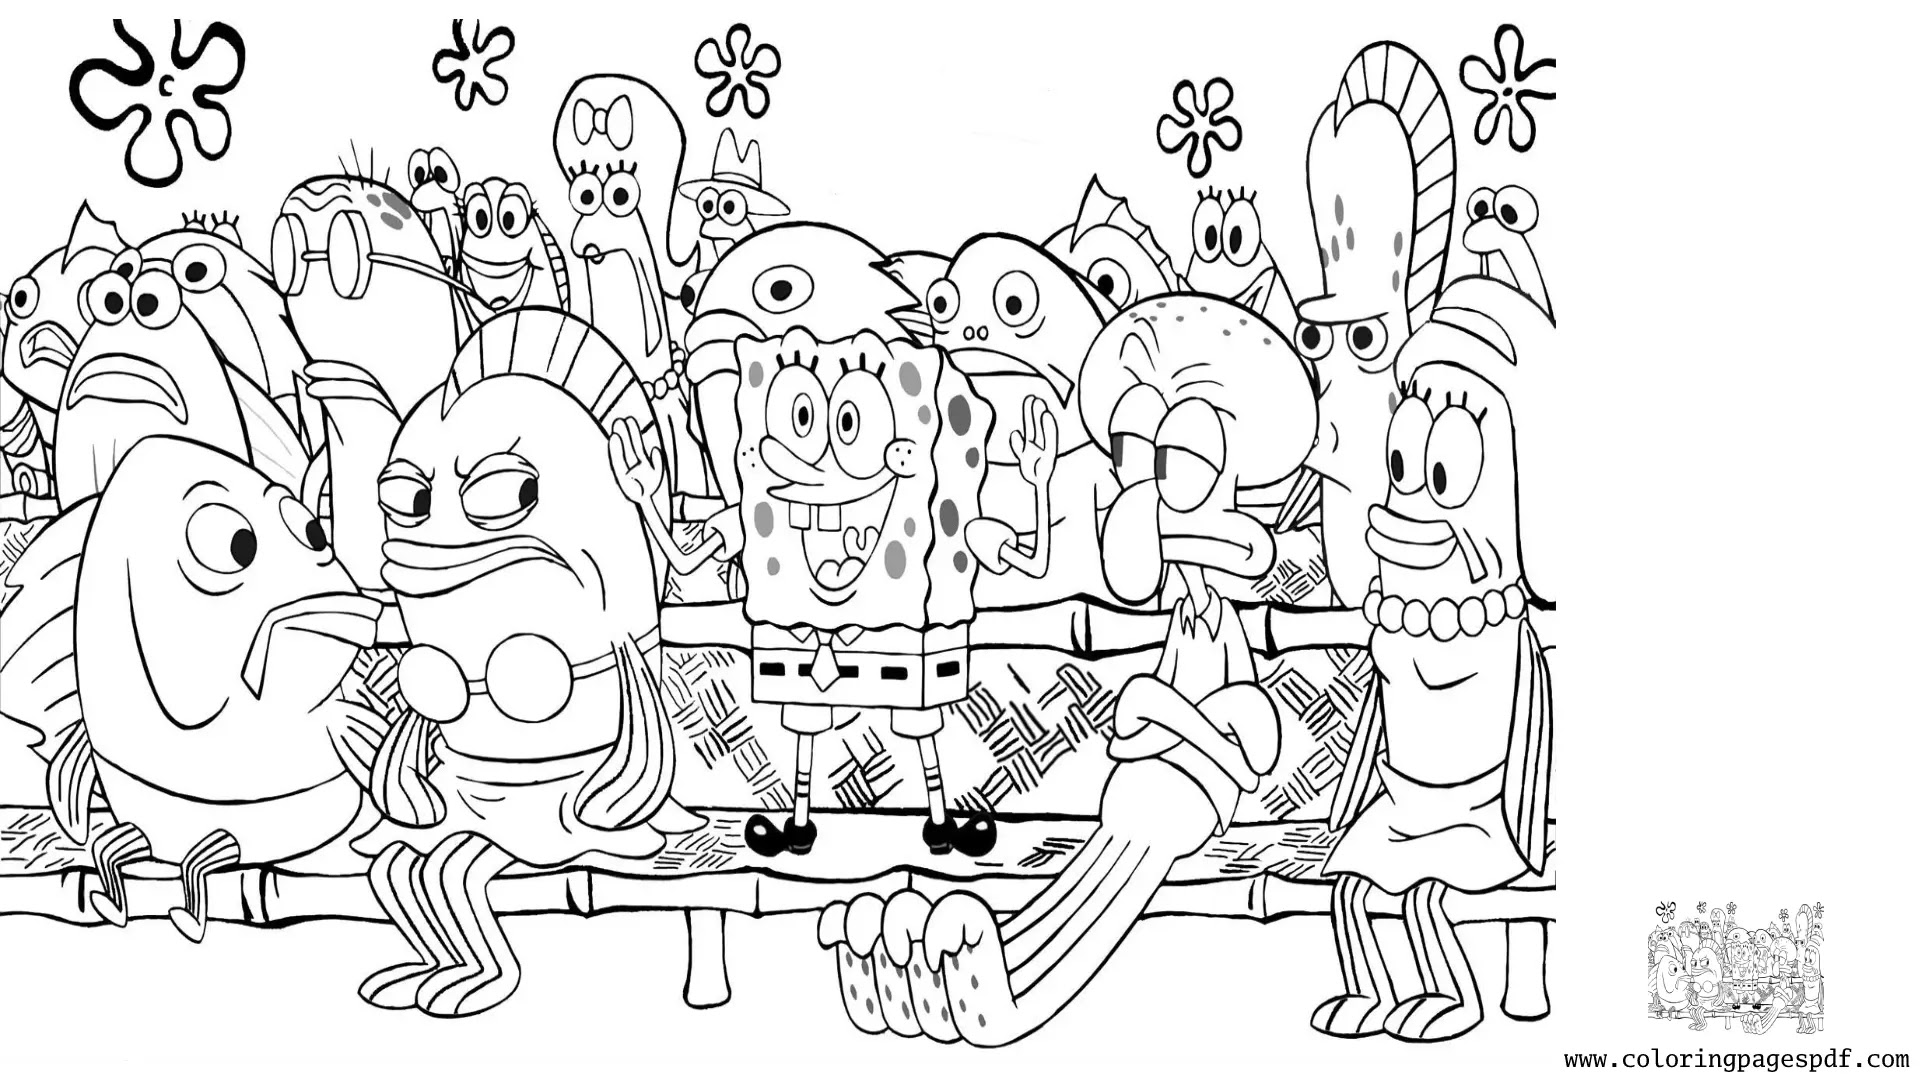 Coloring Pages Of Excited SpongeBob In A Crowd